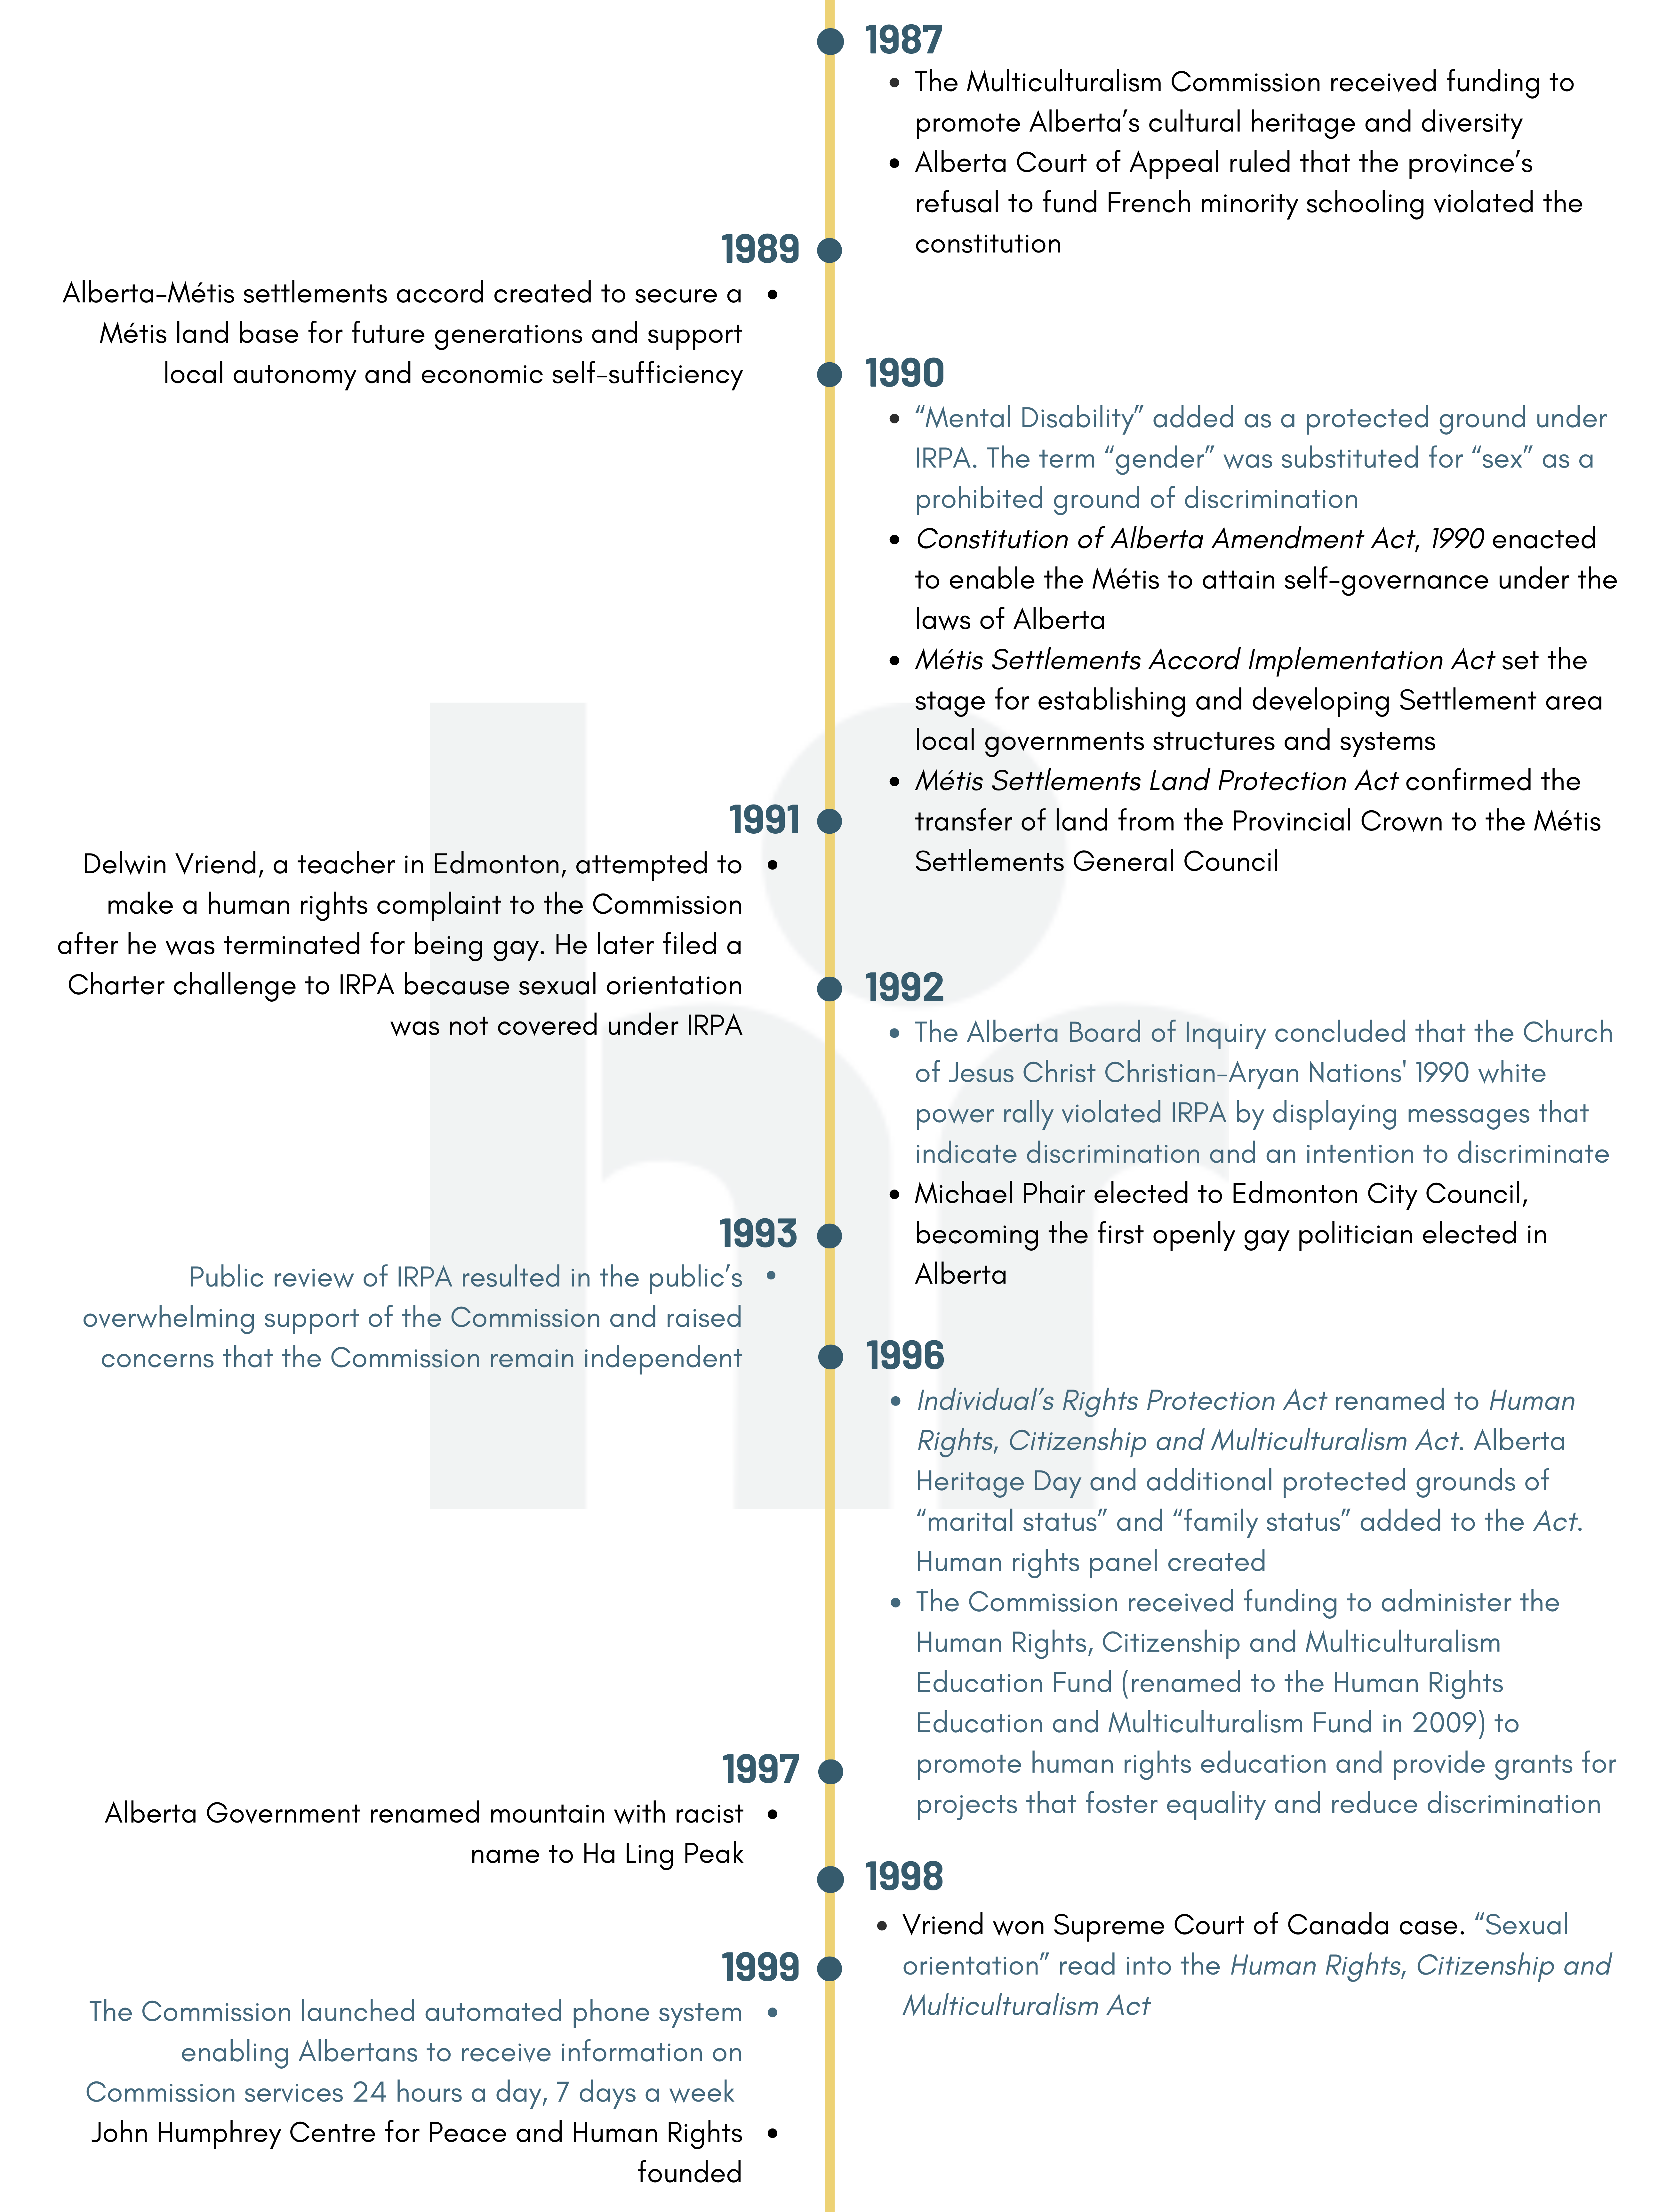 Timeline from 1987 to 1999 describing significant events in Alberta's human rights history. See link at top of page for full text.